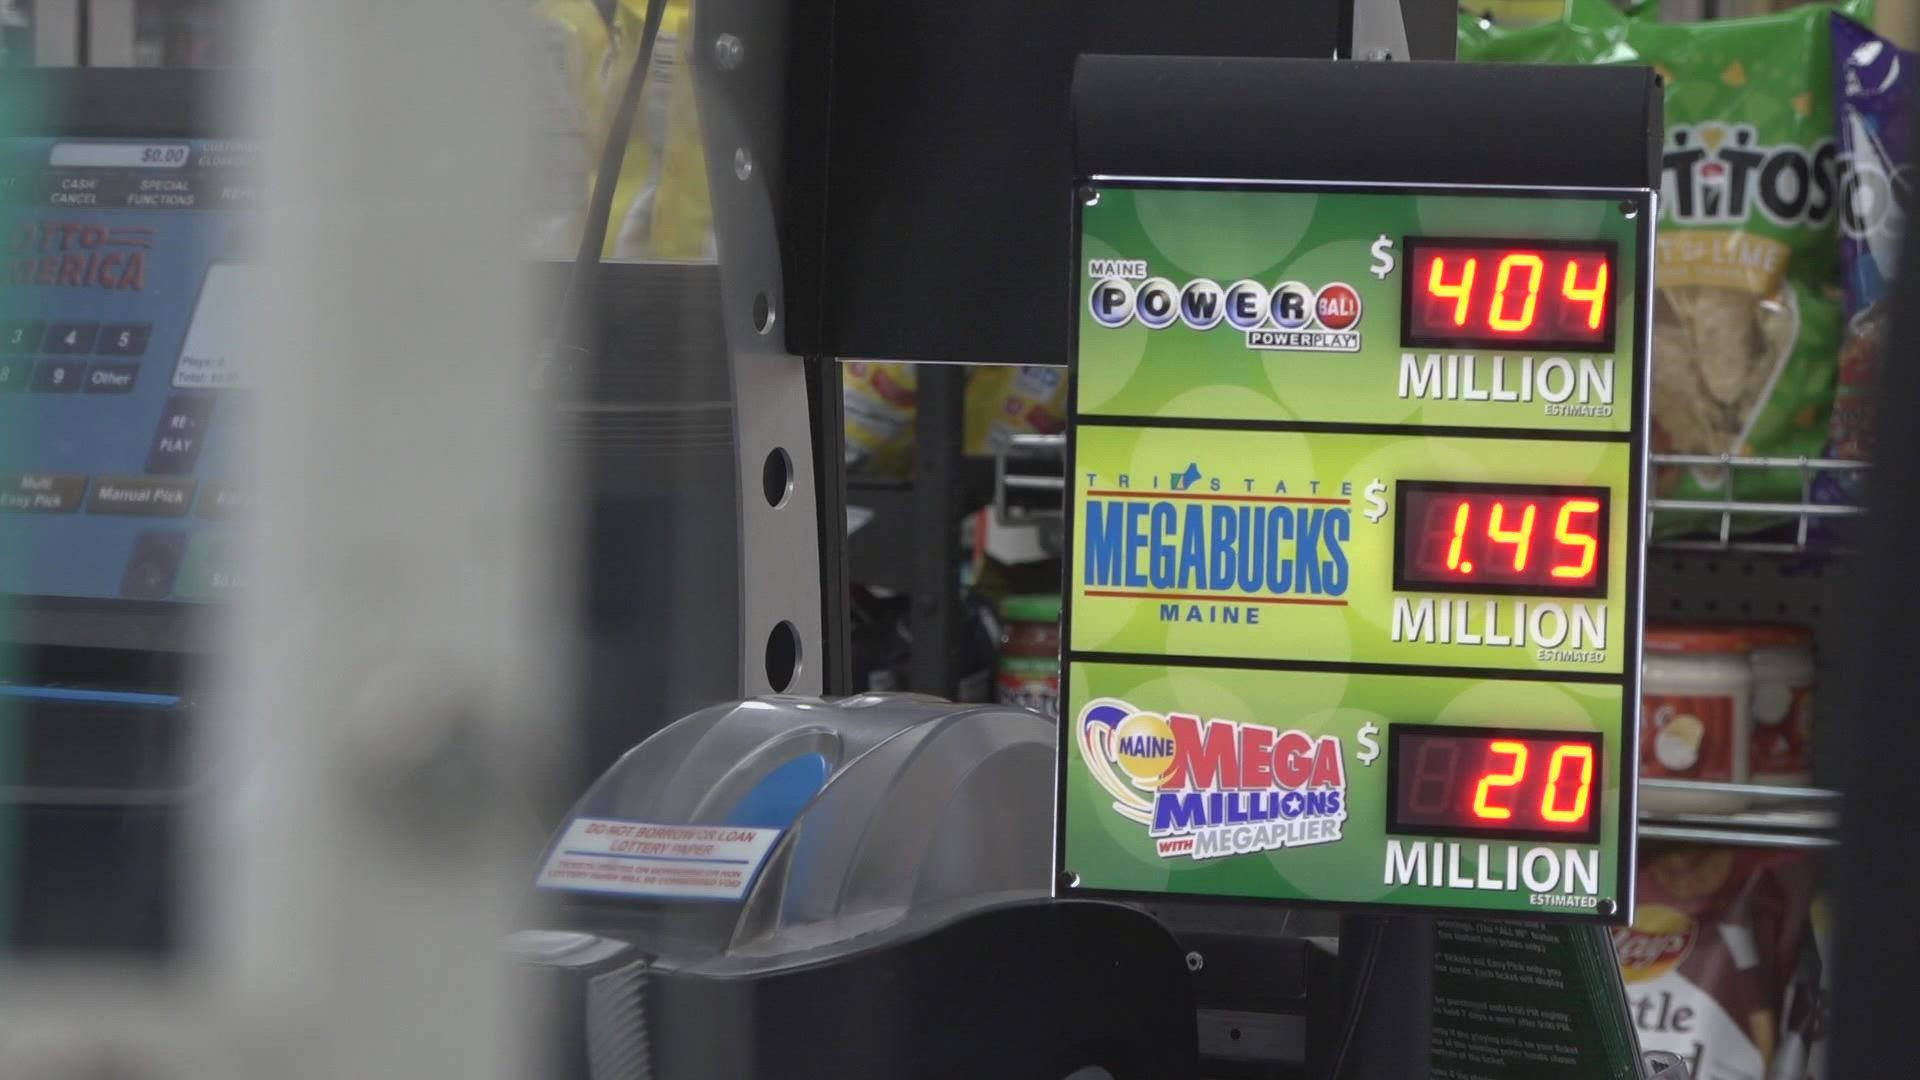 The winning Mega Millions lottery ticket, worth $1.35 billion, was sold Friday, Jan. 13, at Hometown Gas & Grill in Lebanon, Maine.